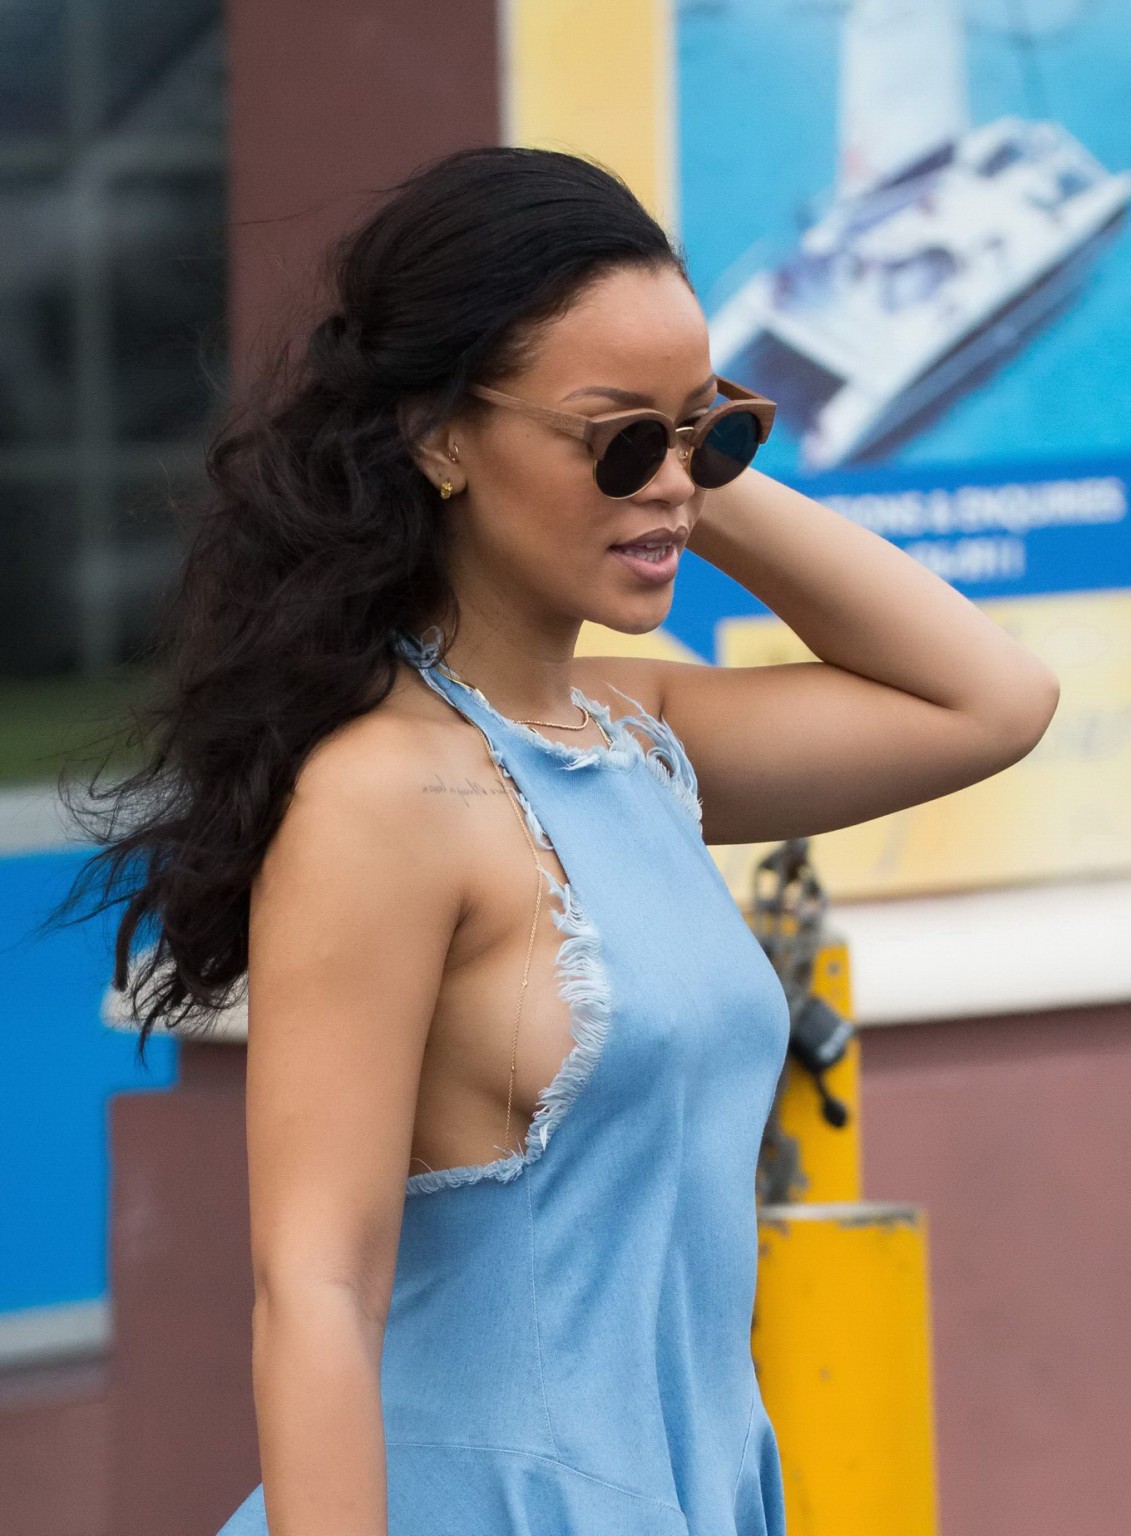 Rihanna Showing Sideboob And Pokies In Tiny Blue Dress Porn Pictures Xxx Photos Sex Images